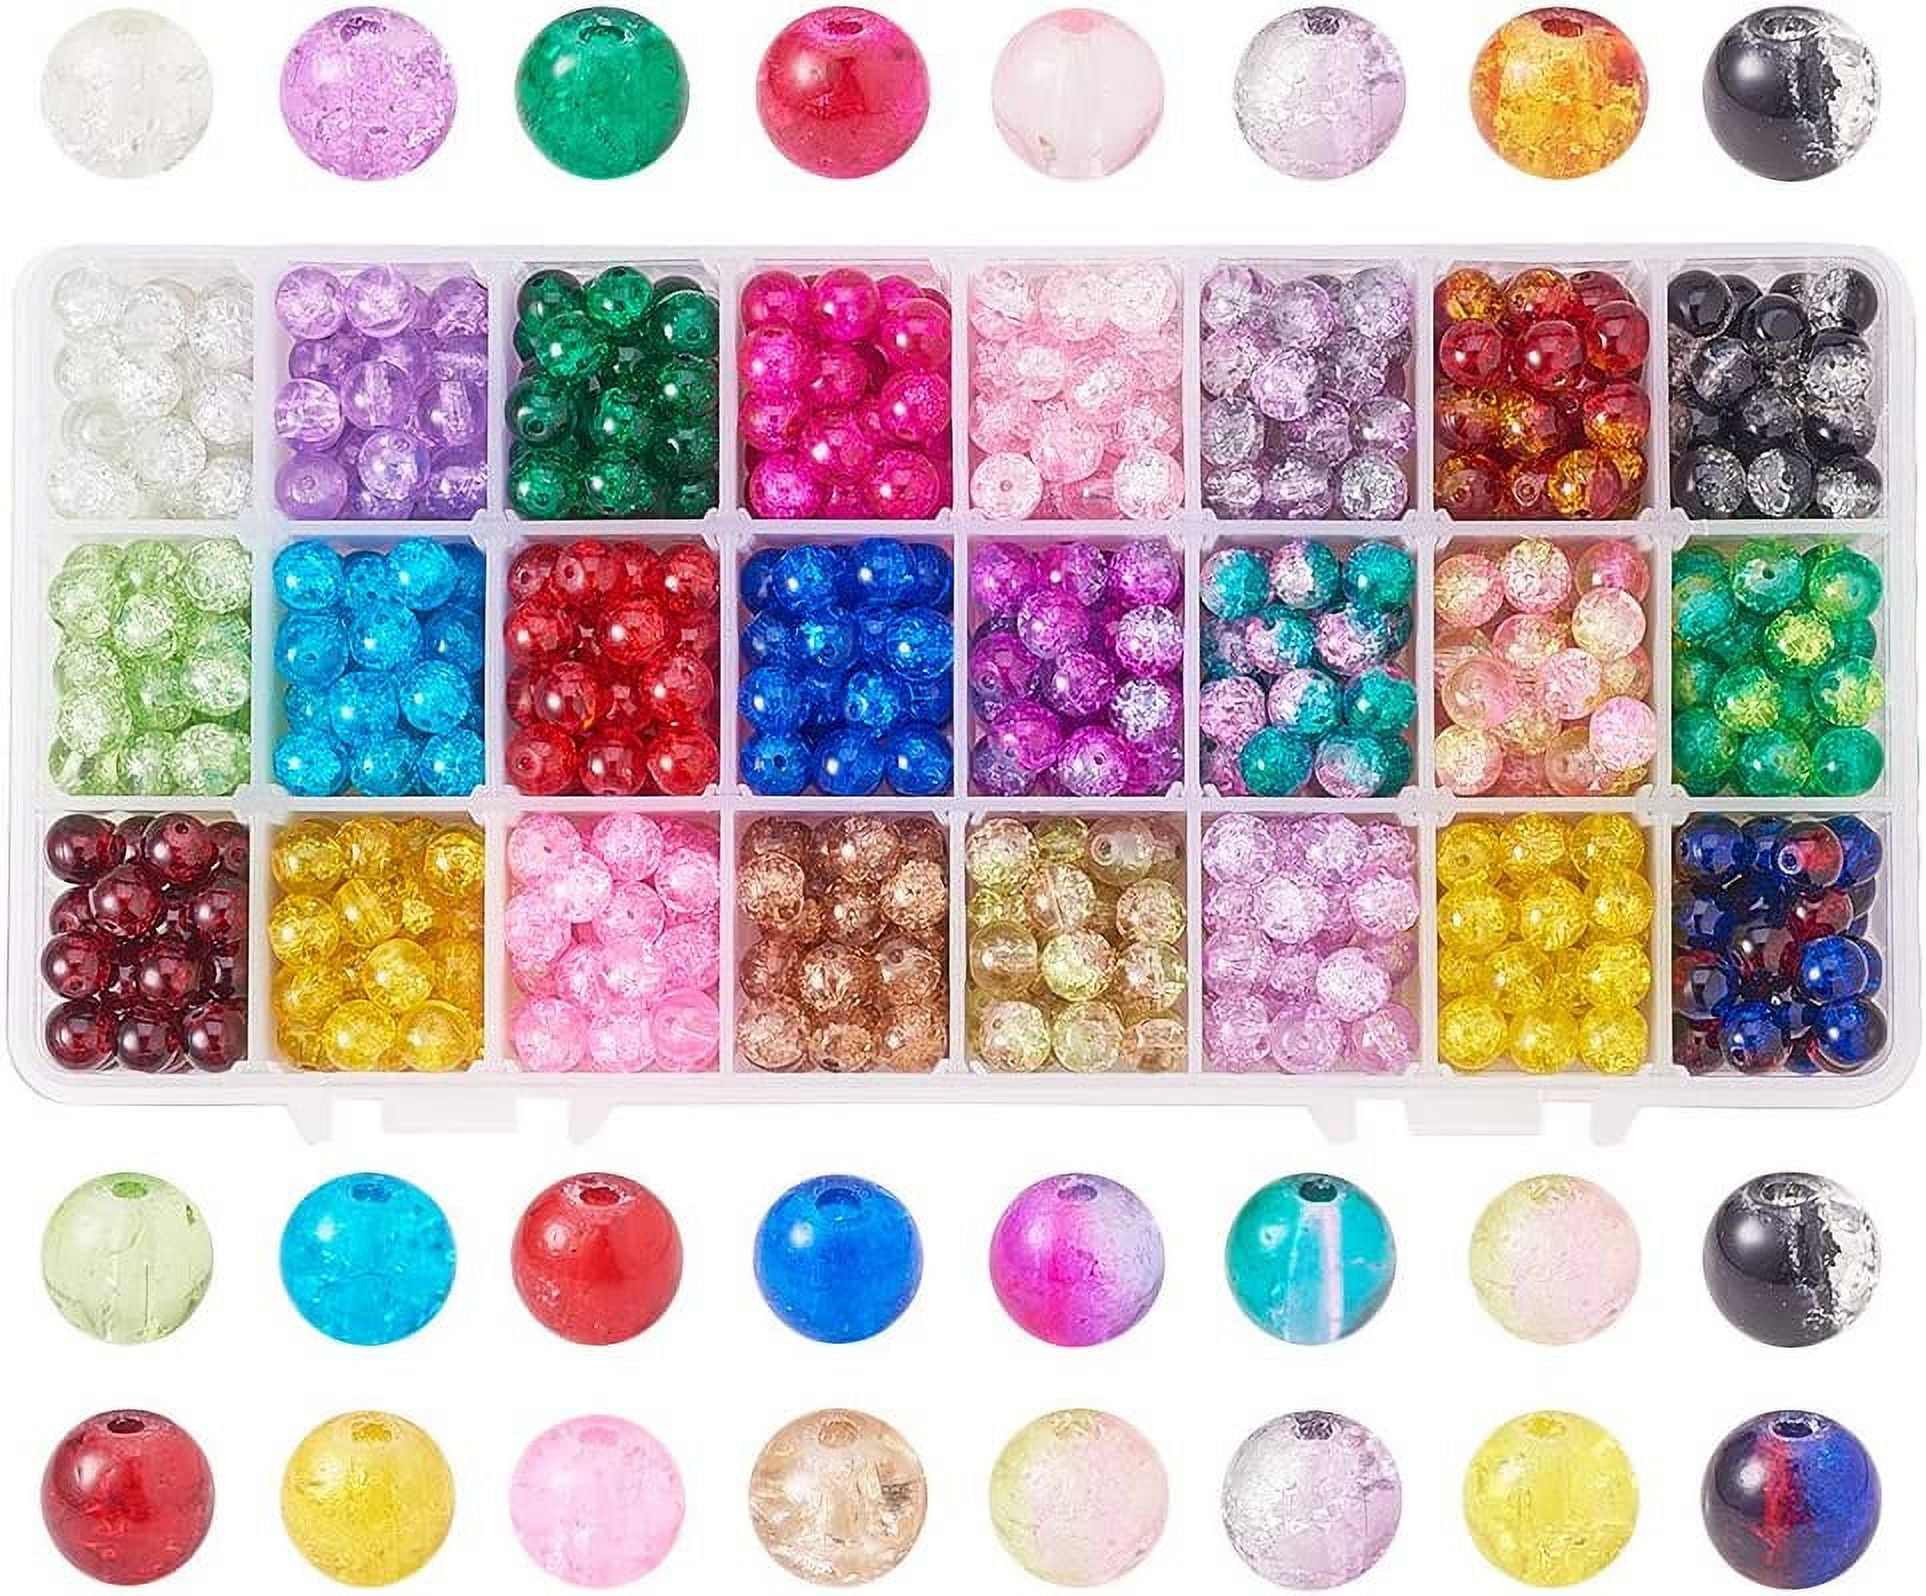 1000pcs 10 Color Crackle Glass Beads 4mm Lampwork Handcrafted